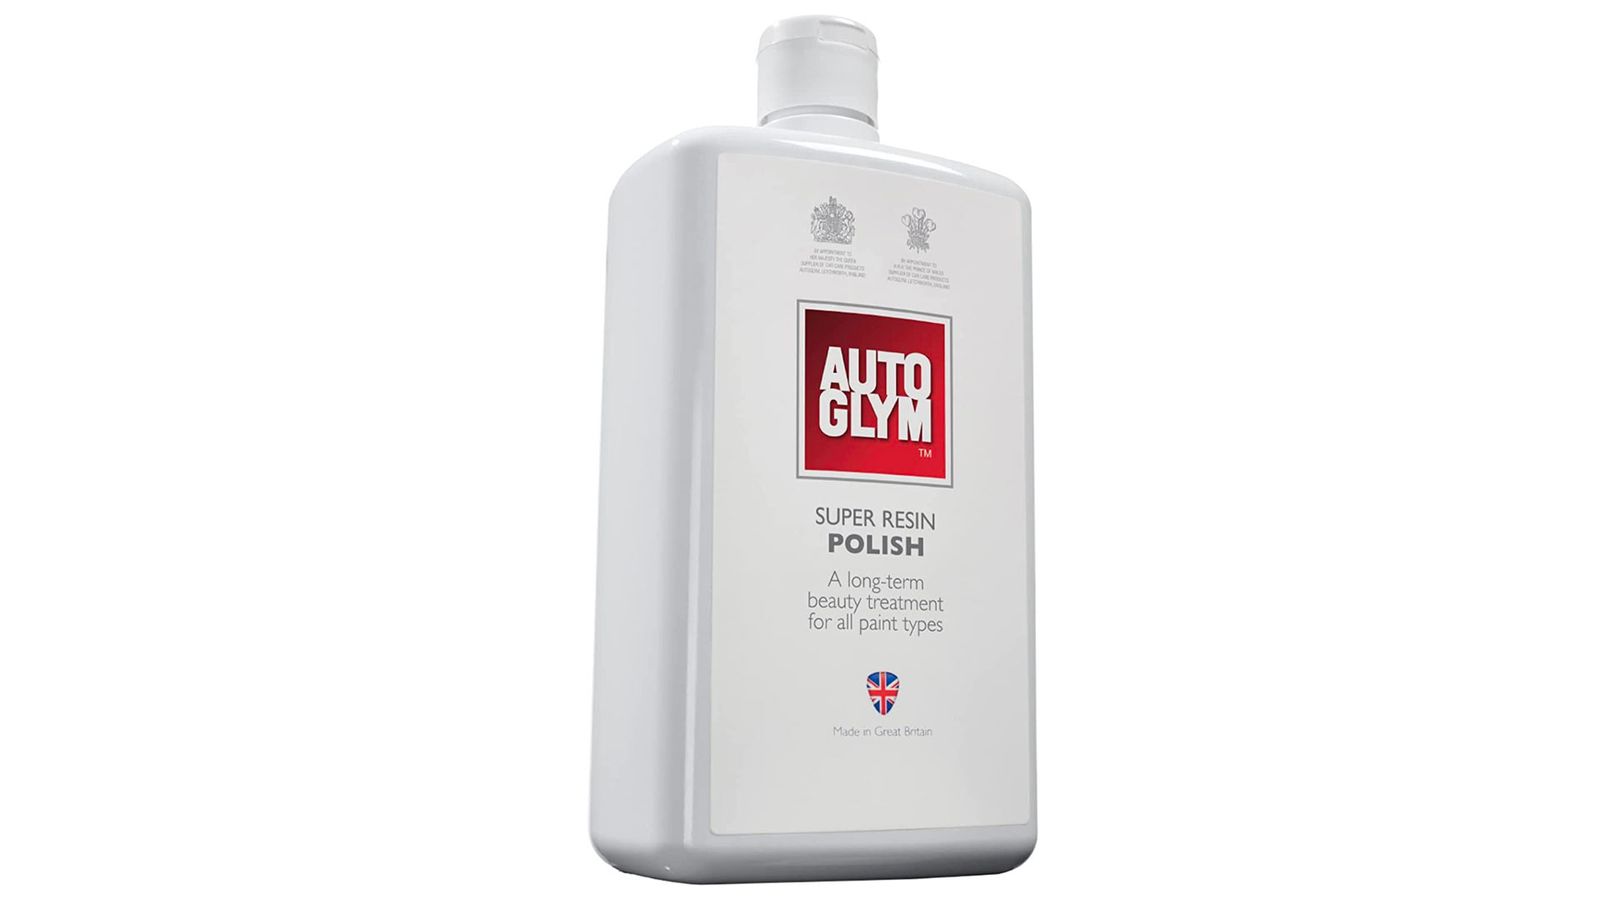 Autoglym Super Resin Polish product image of a white squared-off bottle with a red label.